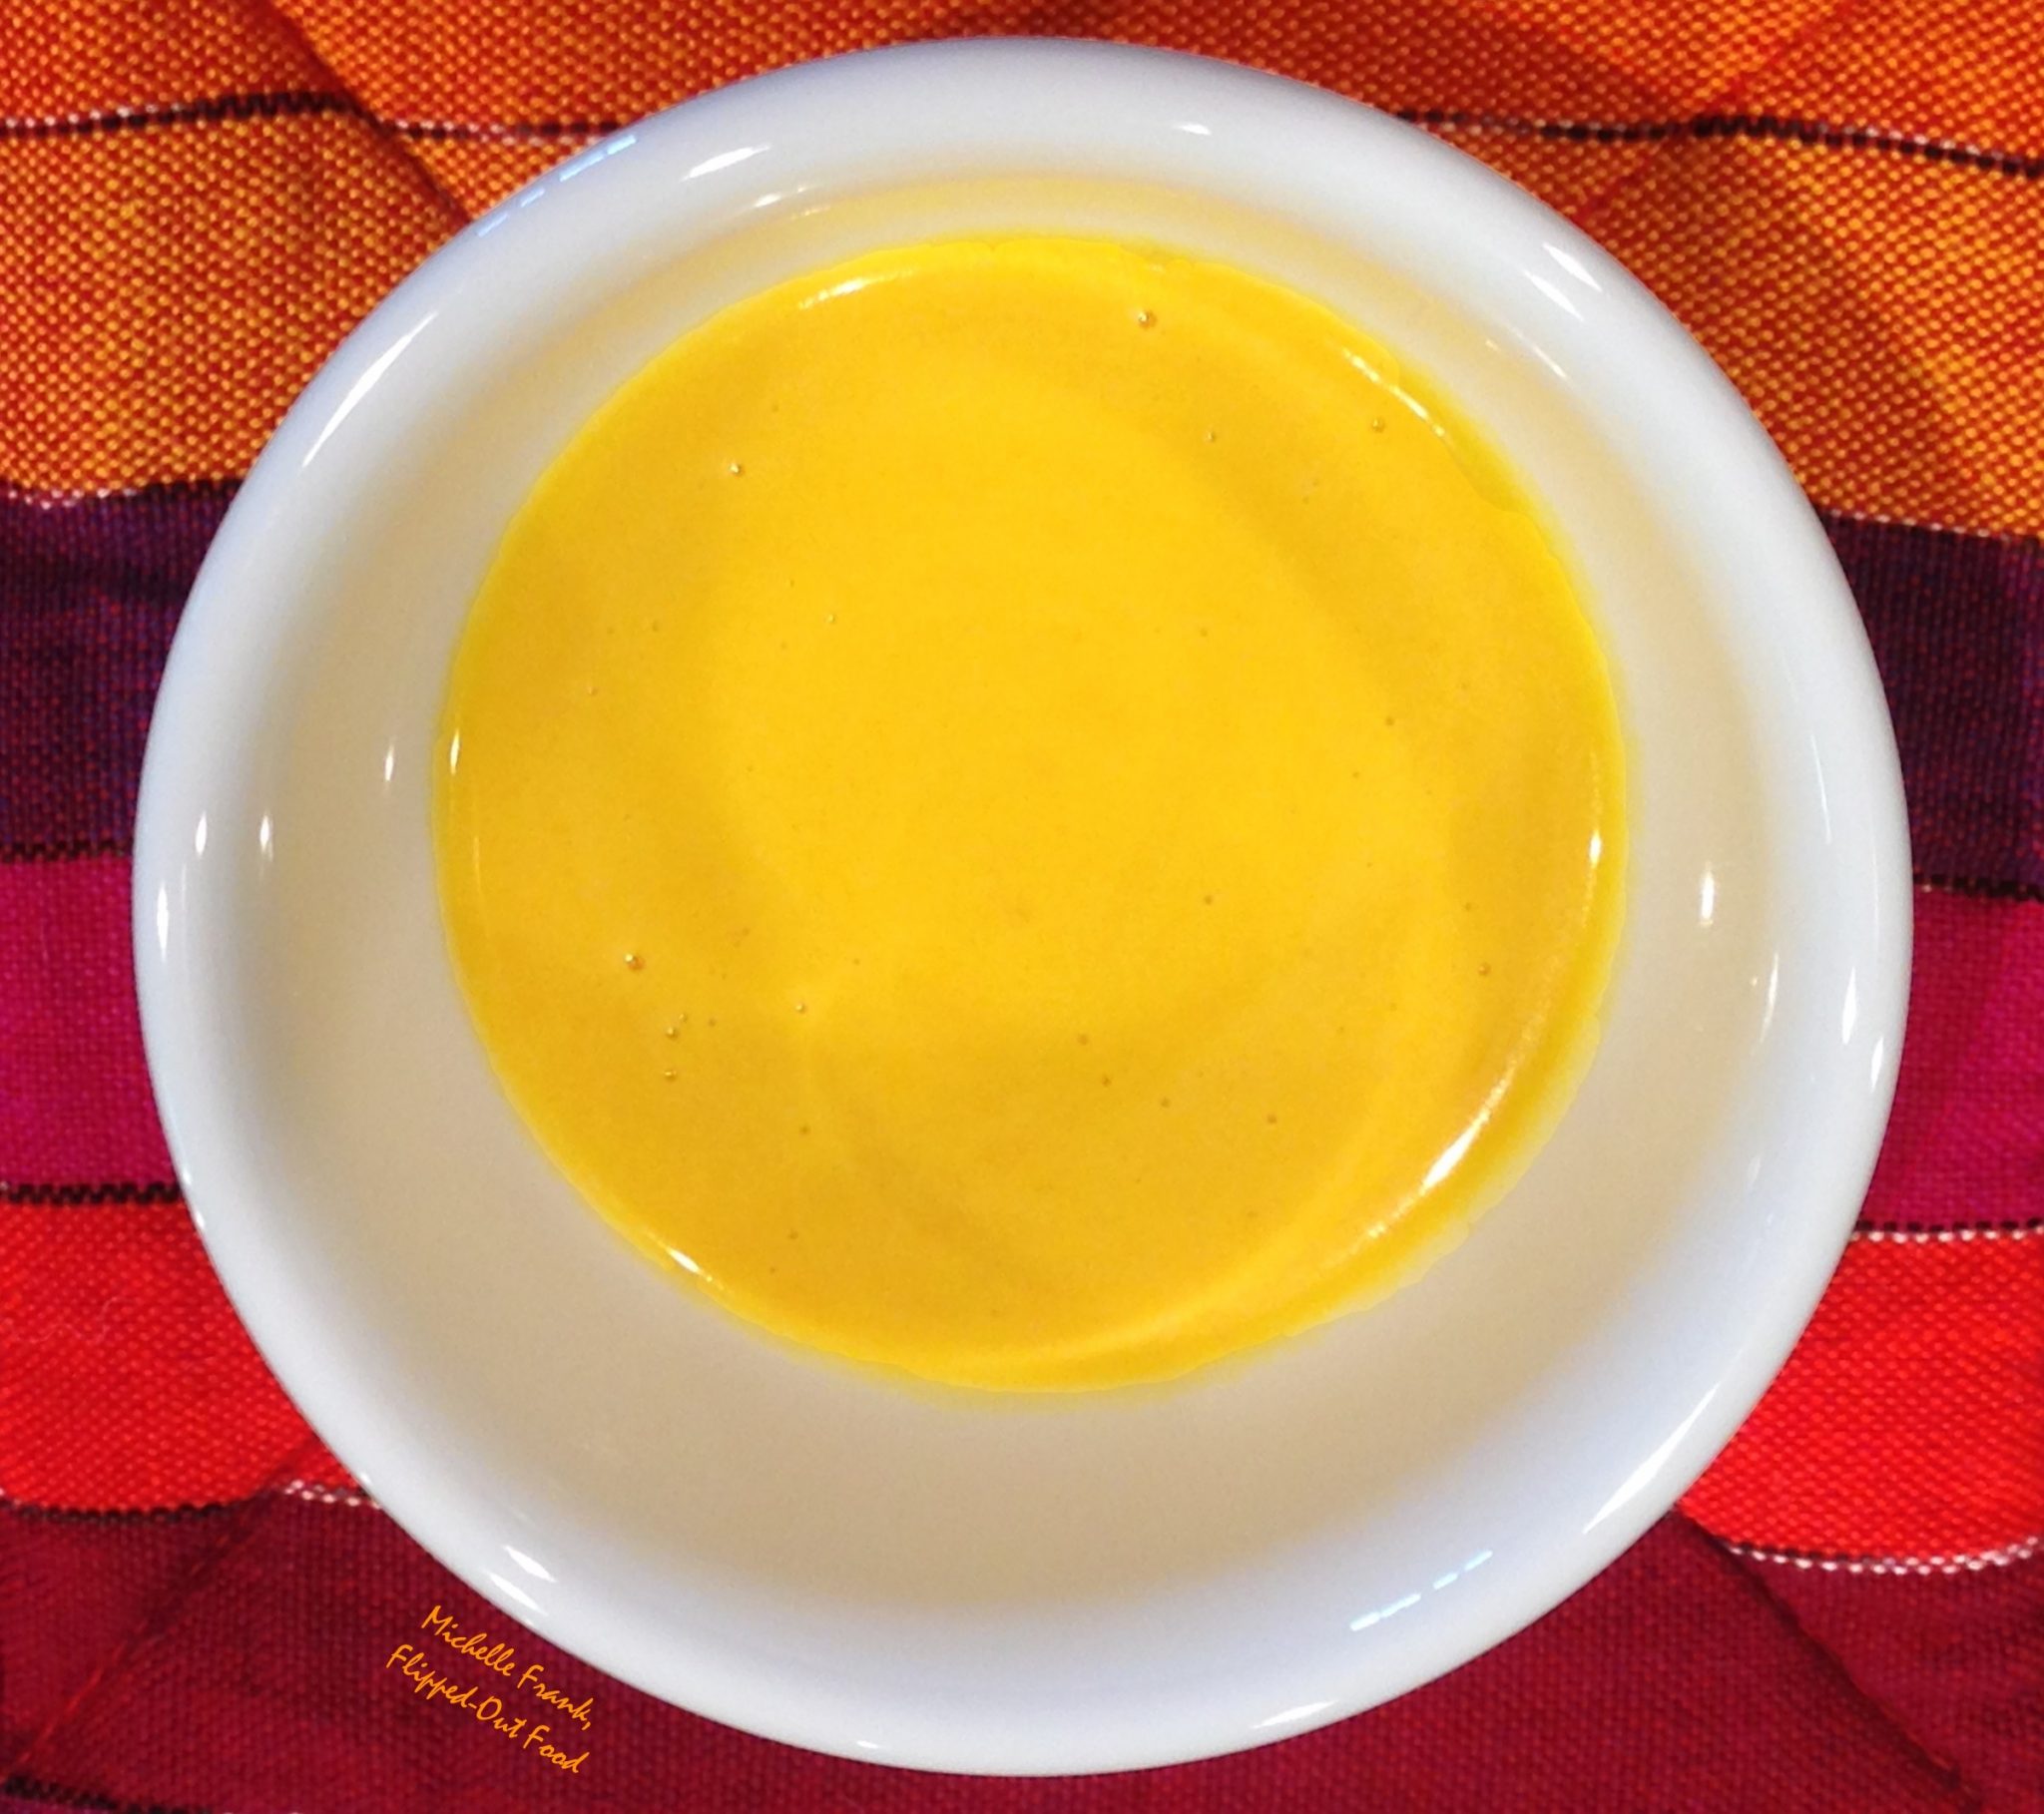 ginger-turmeric butternut squash soup at my buddy's house